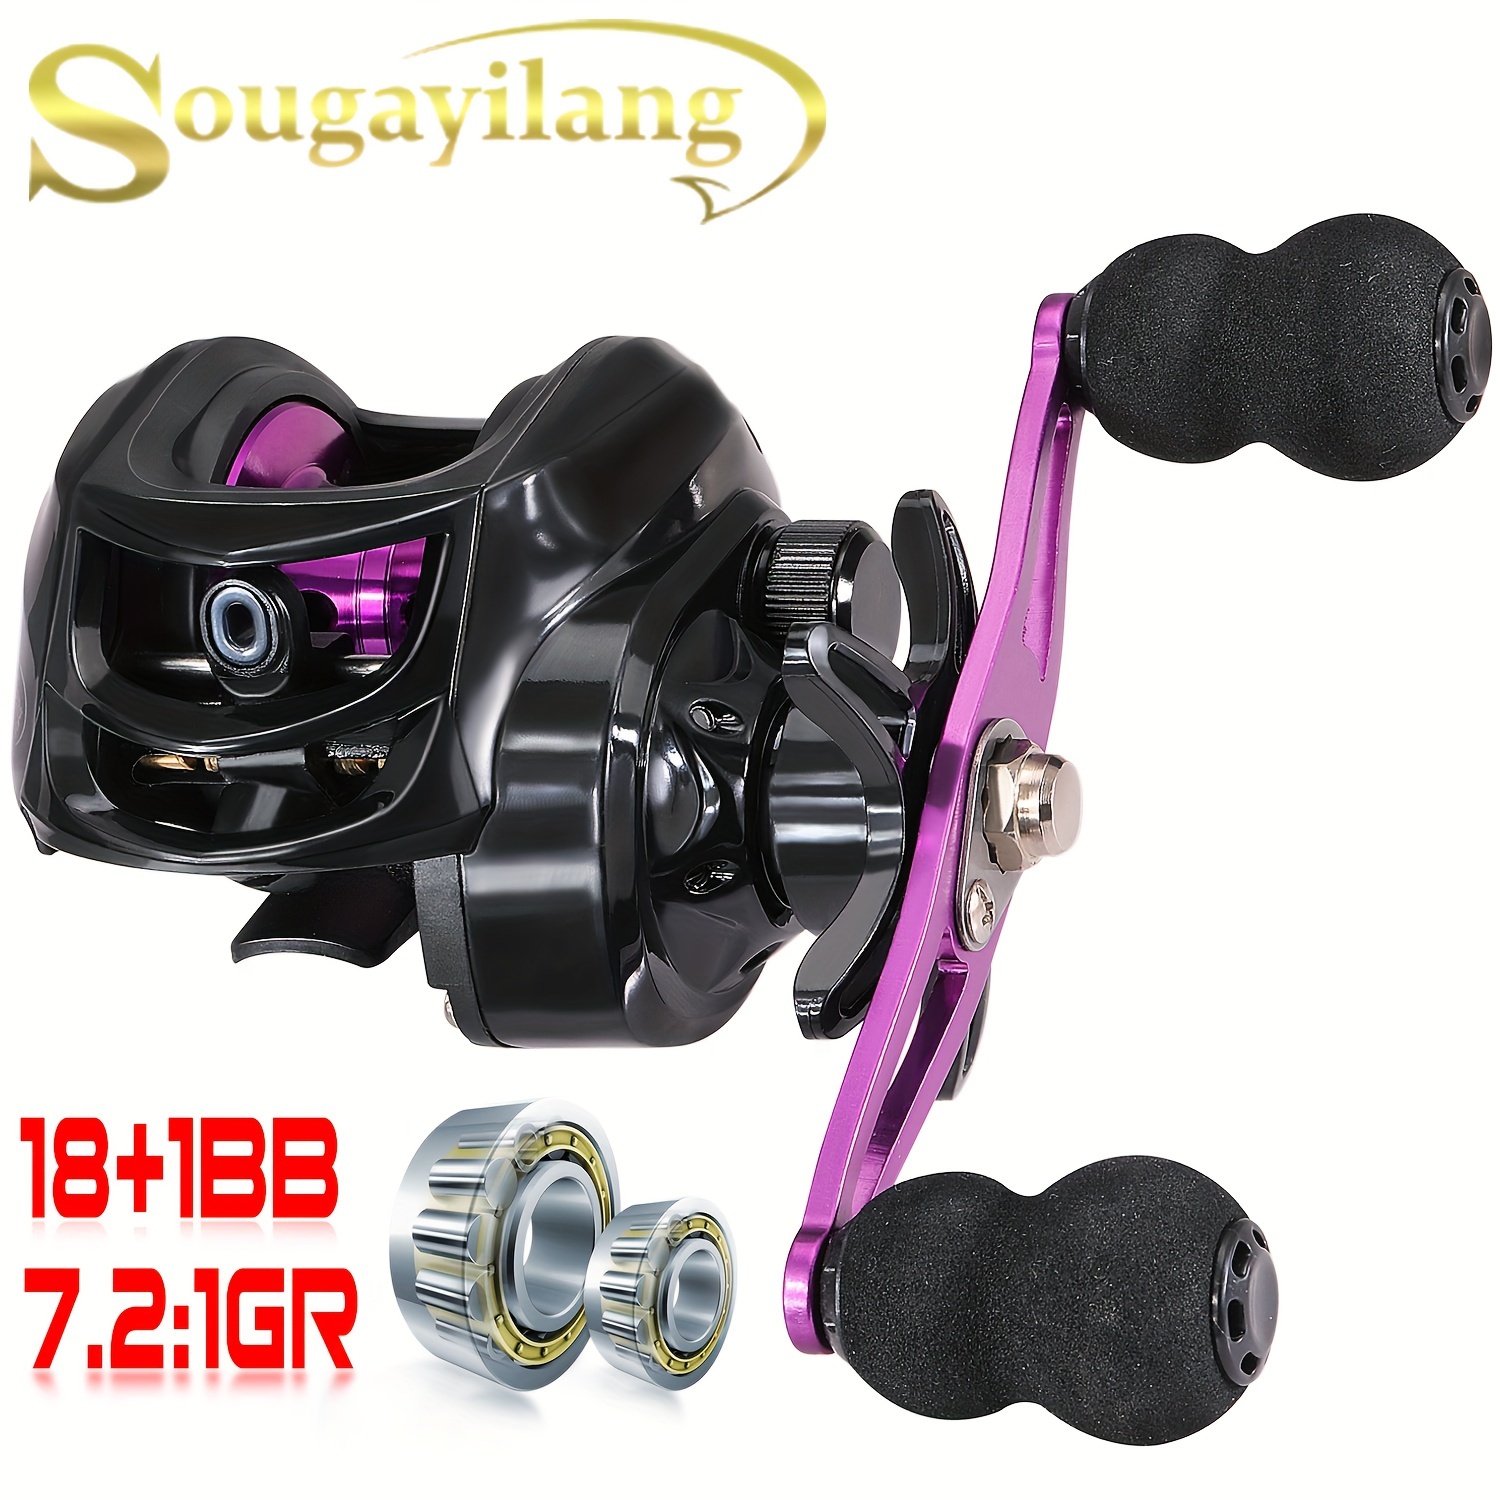 

Sougayilang Fishing Reel With A Gear Ratio Of 7.2:1, Magnetic Brake System, Maximum Drag Force Of 10kg, Lightweight And Durable, Suitable For Saltwater And Freshwater Fishing Gear And Accessories